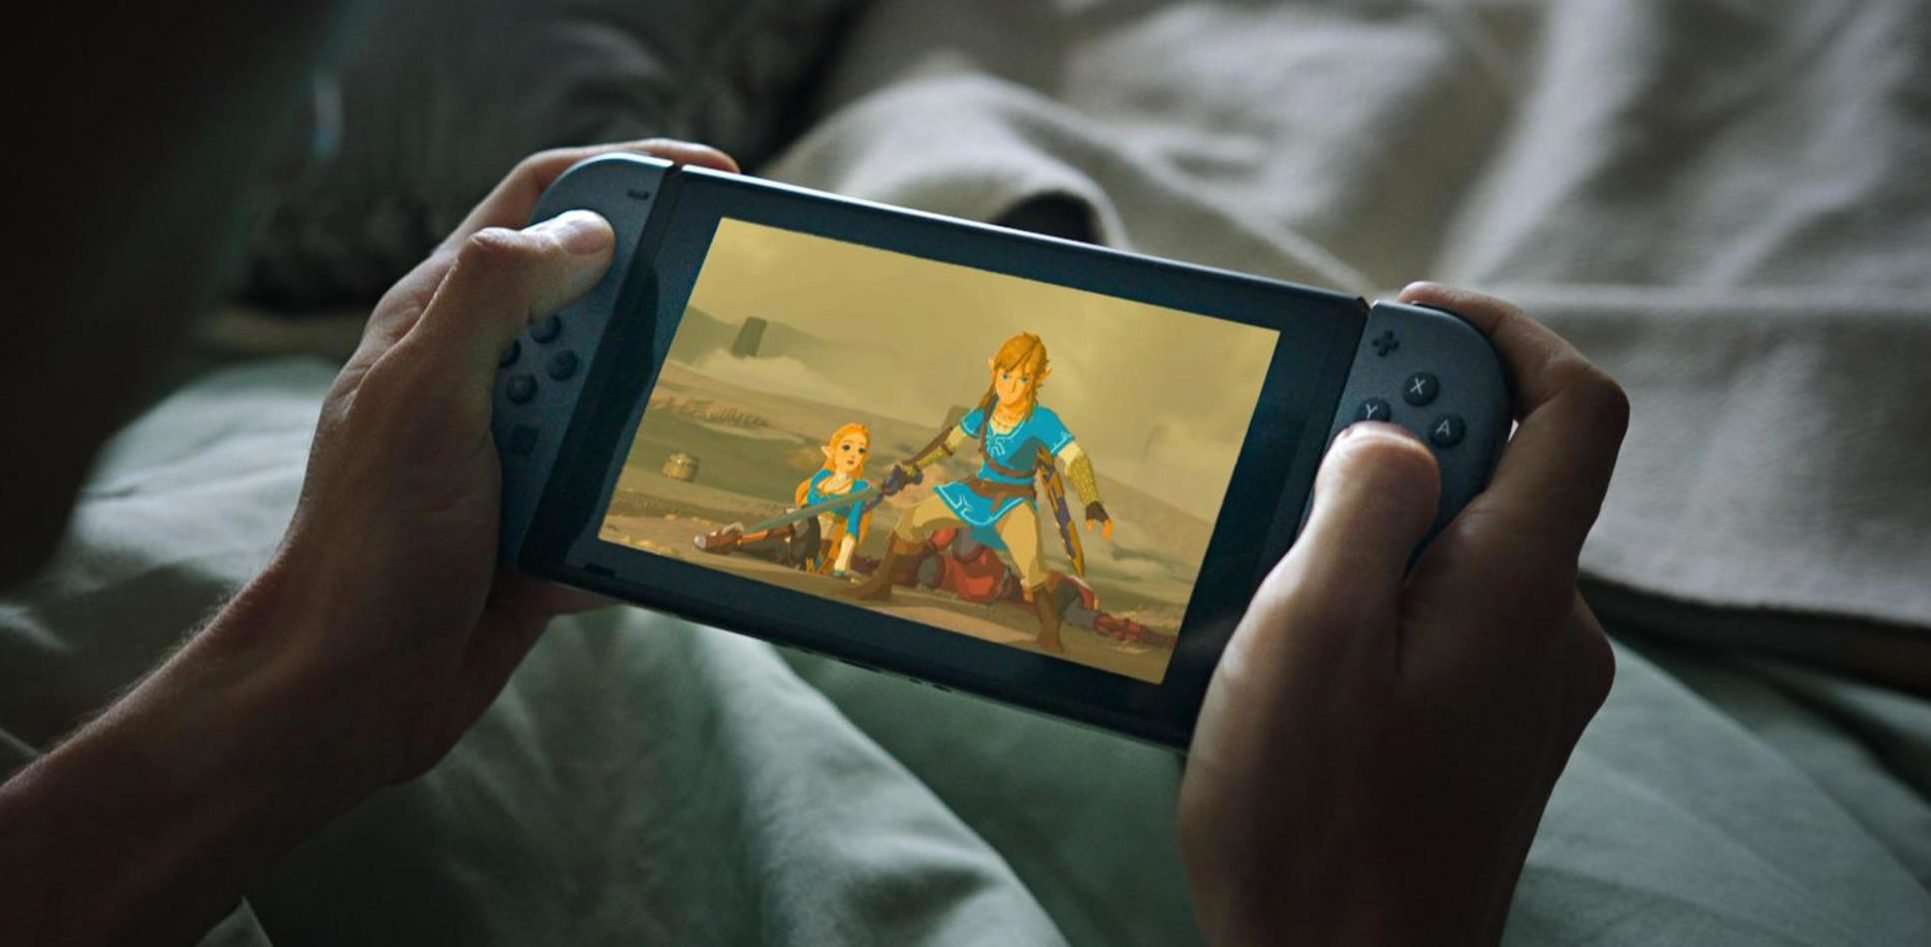 image for Nintendo says it has âno plans’ for a Switch price cut